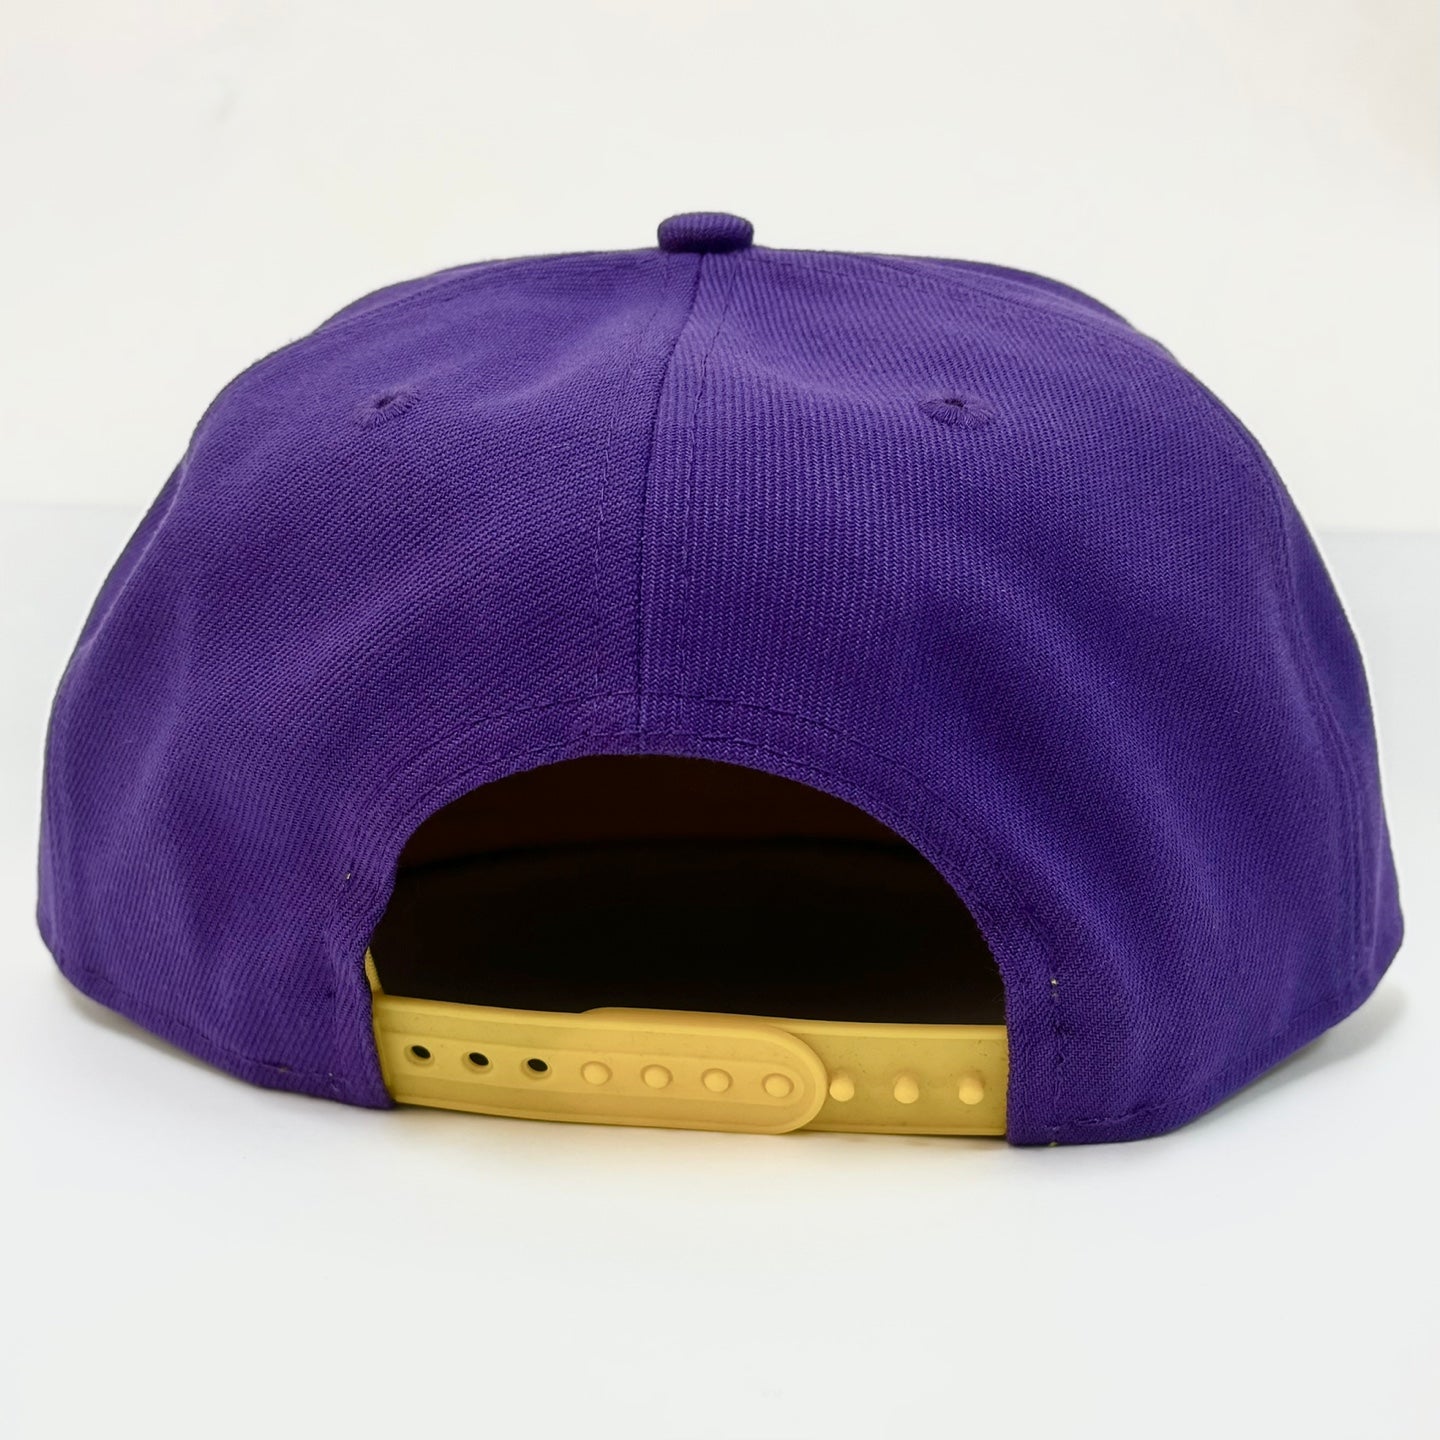 NEW ERA Los Angeles Lakers 59FIFTY Fitted Hat Mens NBA Snapback